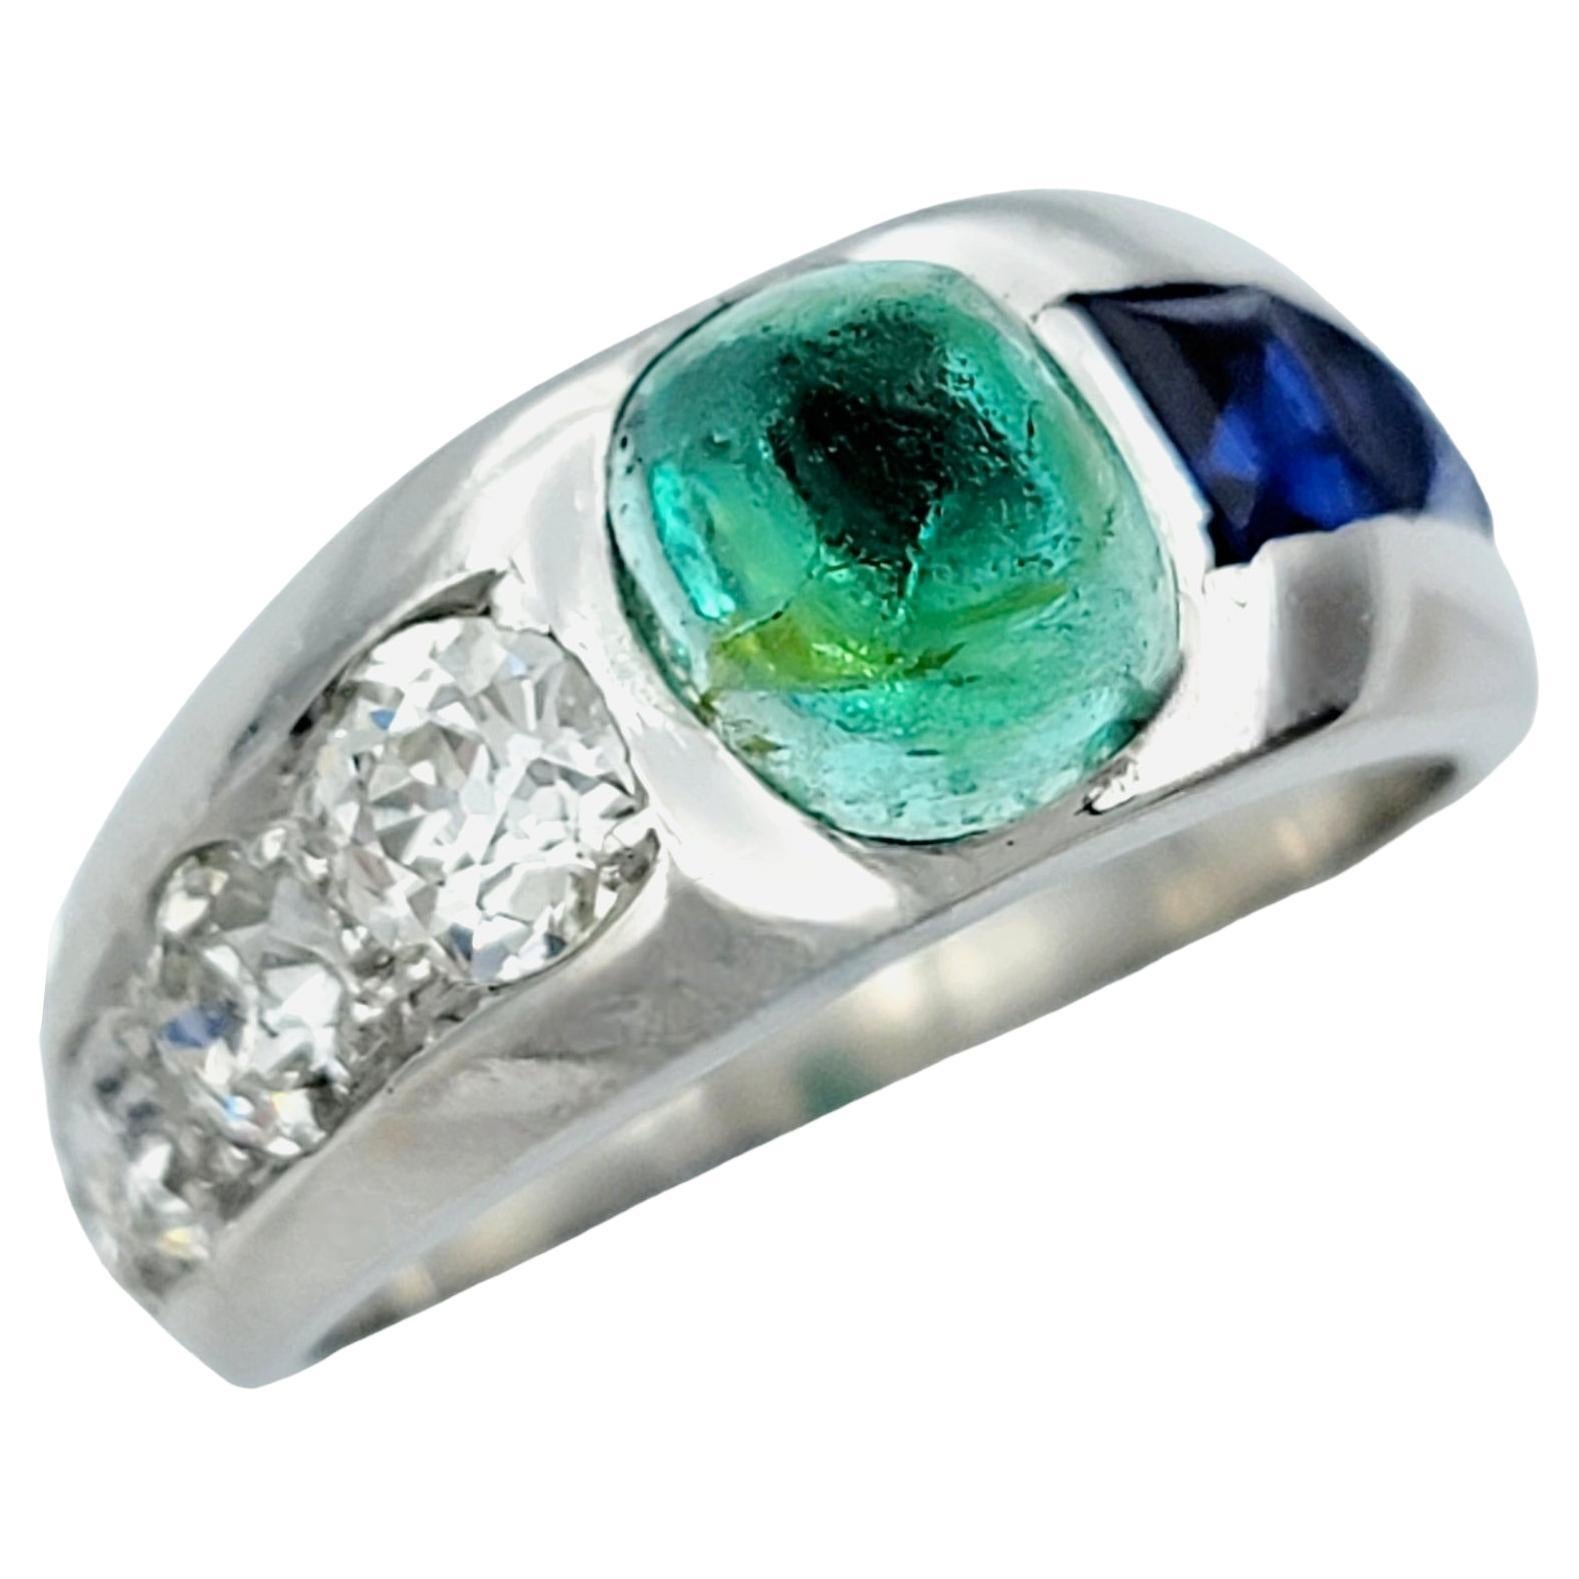 Ring Size: 5.25

This vintage platinum ring exudes elegance and luxury and is sure to make a unique addition to your fine jewelry collection. At its heart lies a mesmerizing cabochon emerald, radiating with natural beauty and captivating allure.